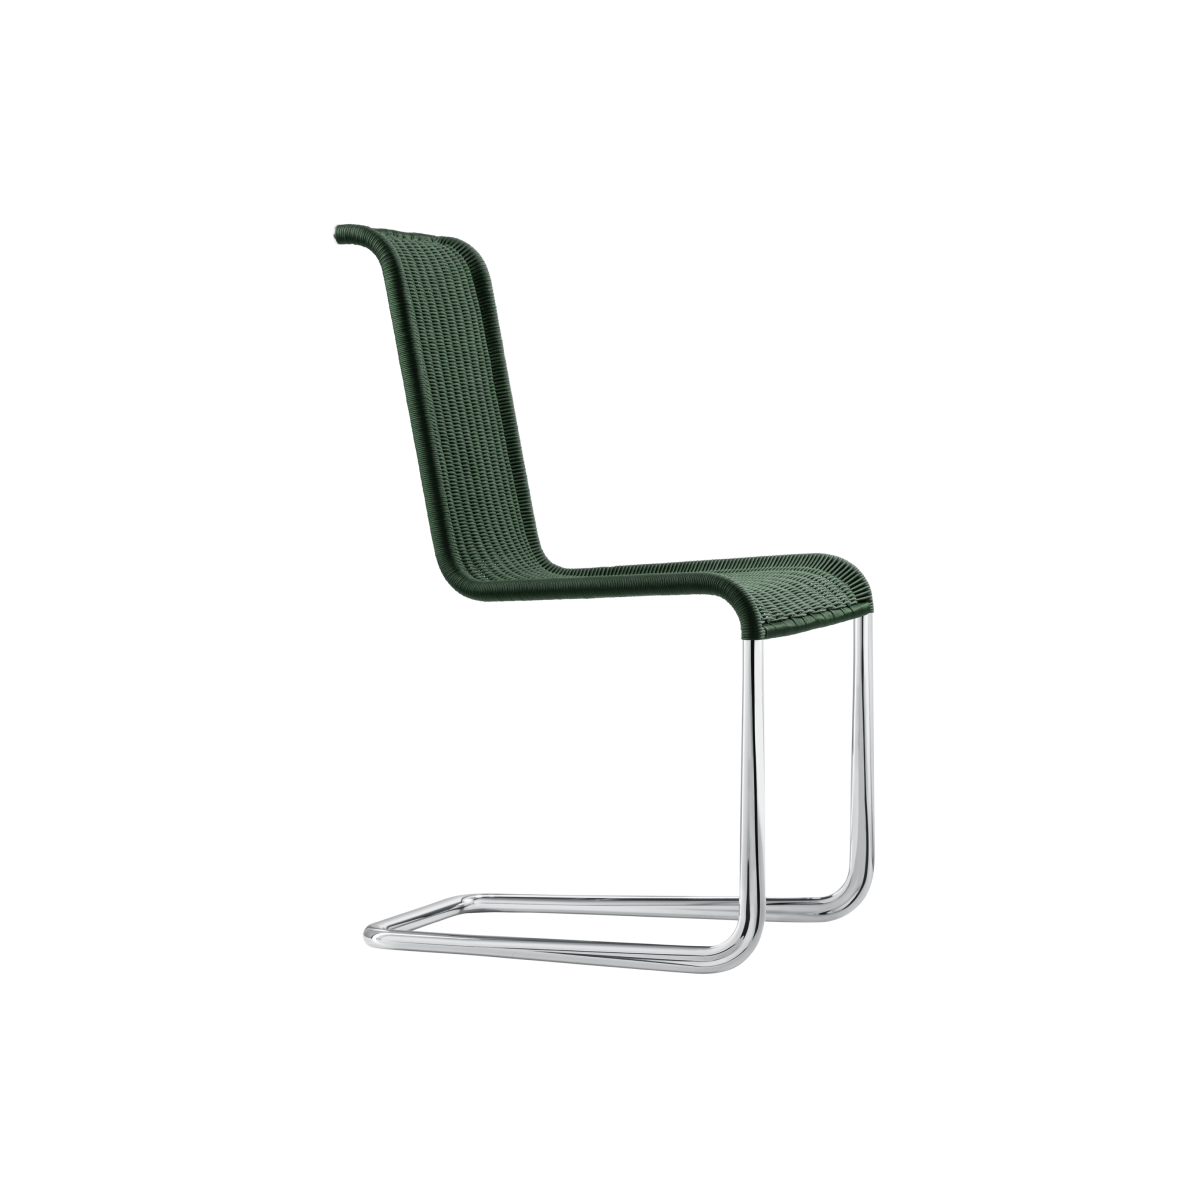 TECTA B20 Cantilever Chair (14colors)